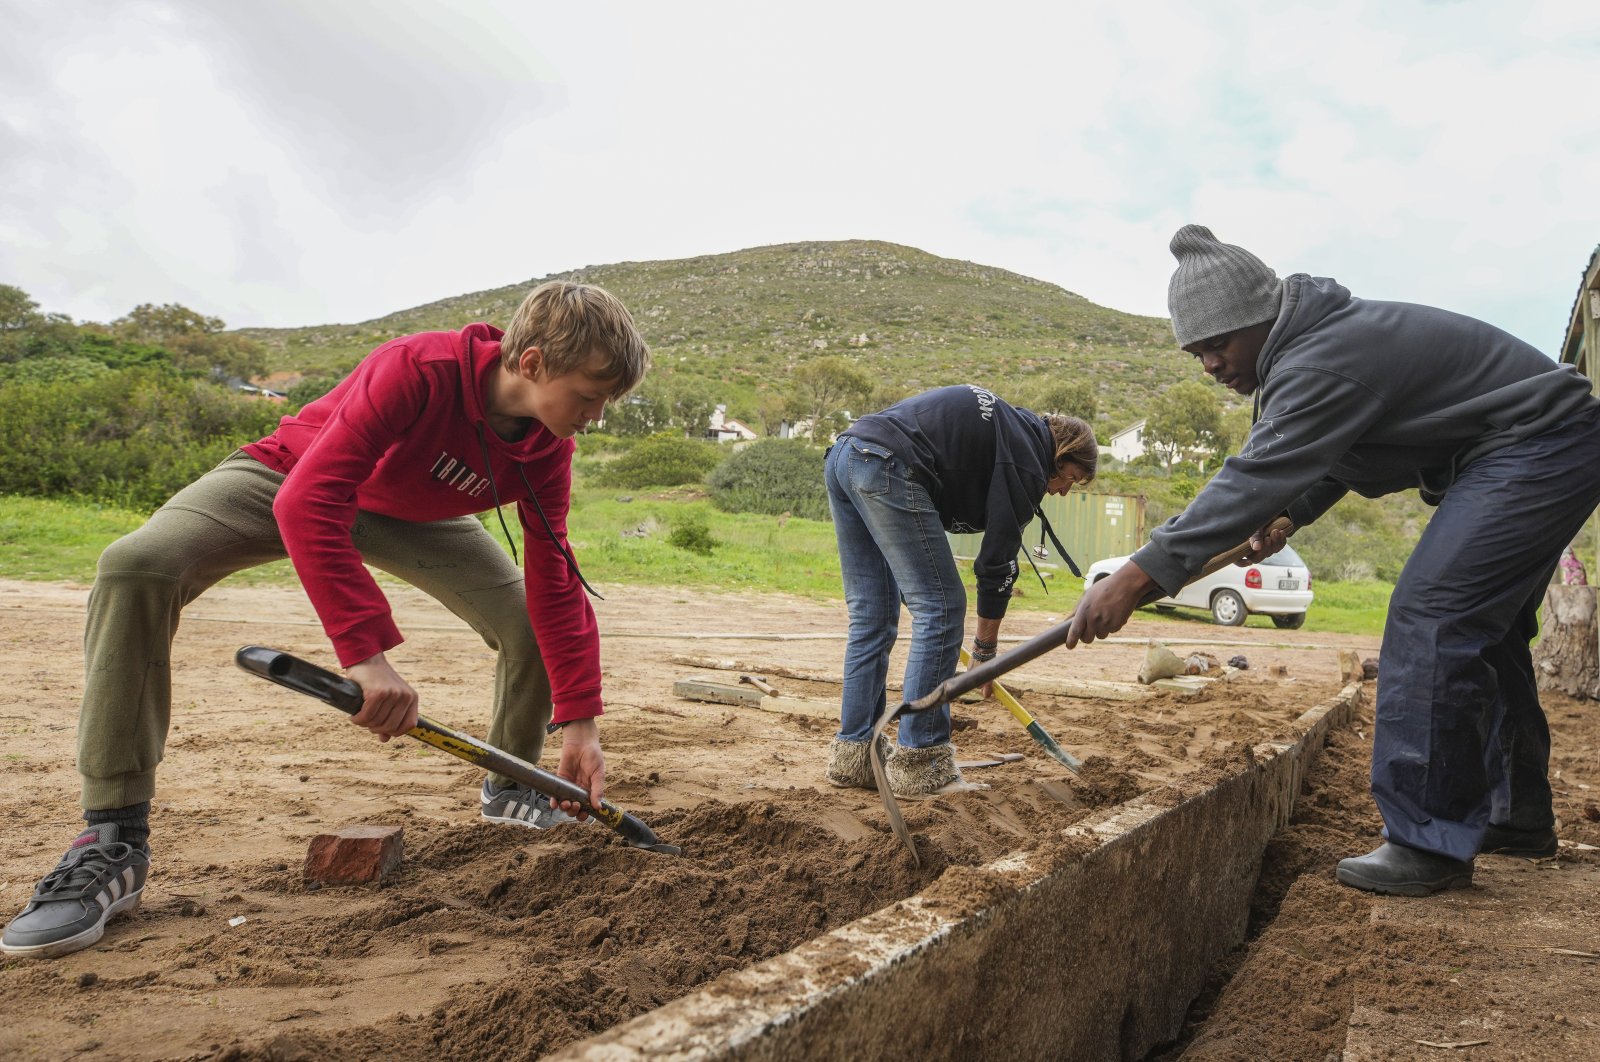 South African volunteers dig trenches for plants at Tears cat rescue center on International Mandela Day in Cape Town, South Africa, July 18 2022. (EPA Photo)